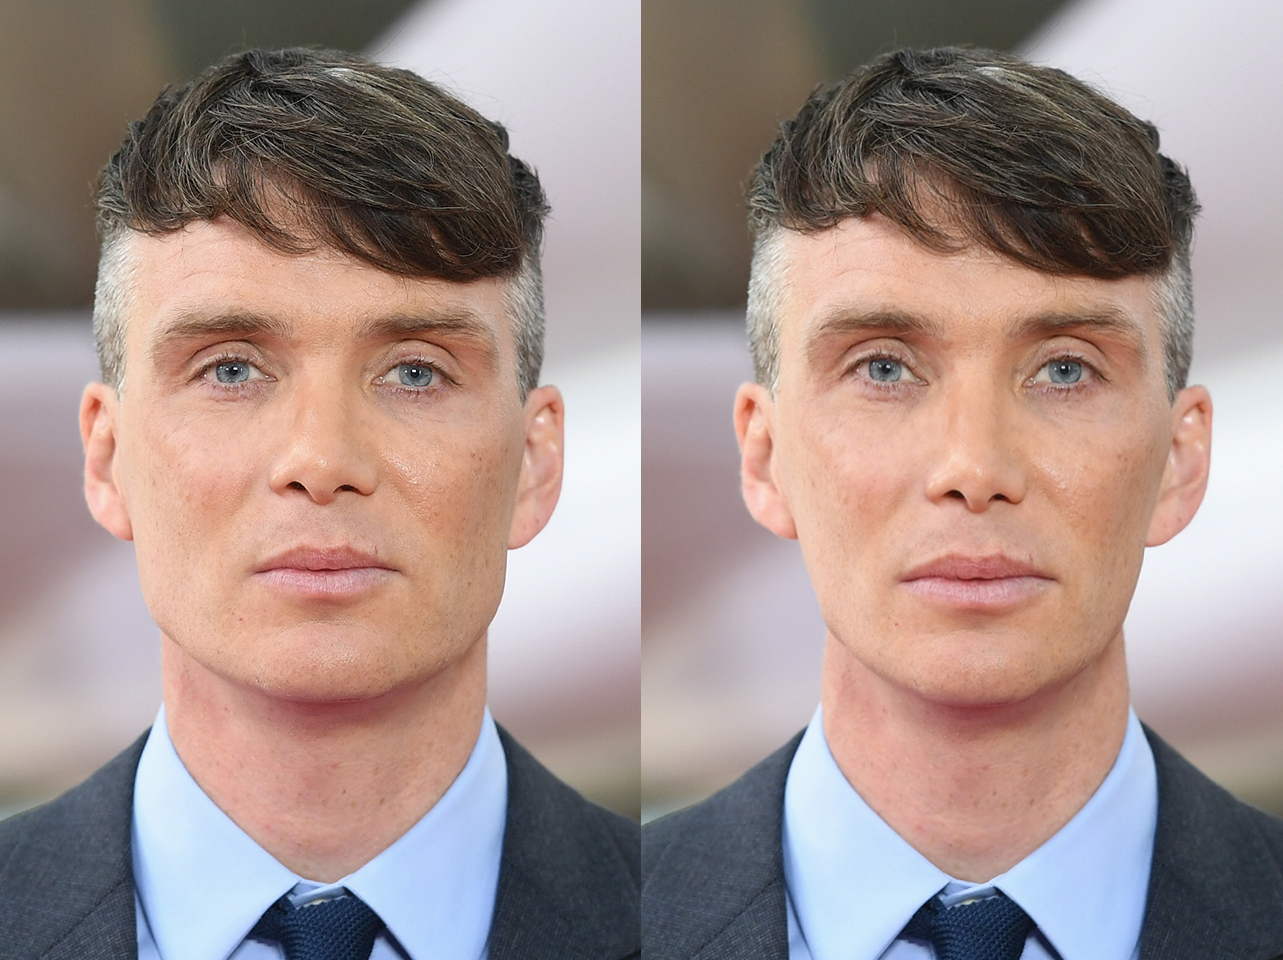 The real Cillian Murphy vs Ideal self | Source: Getty Images